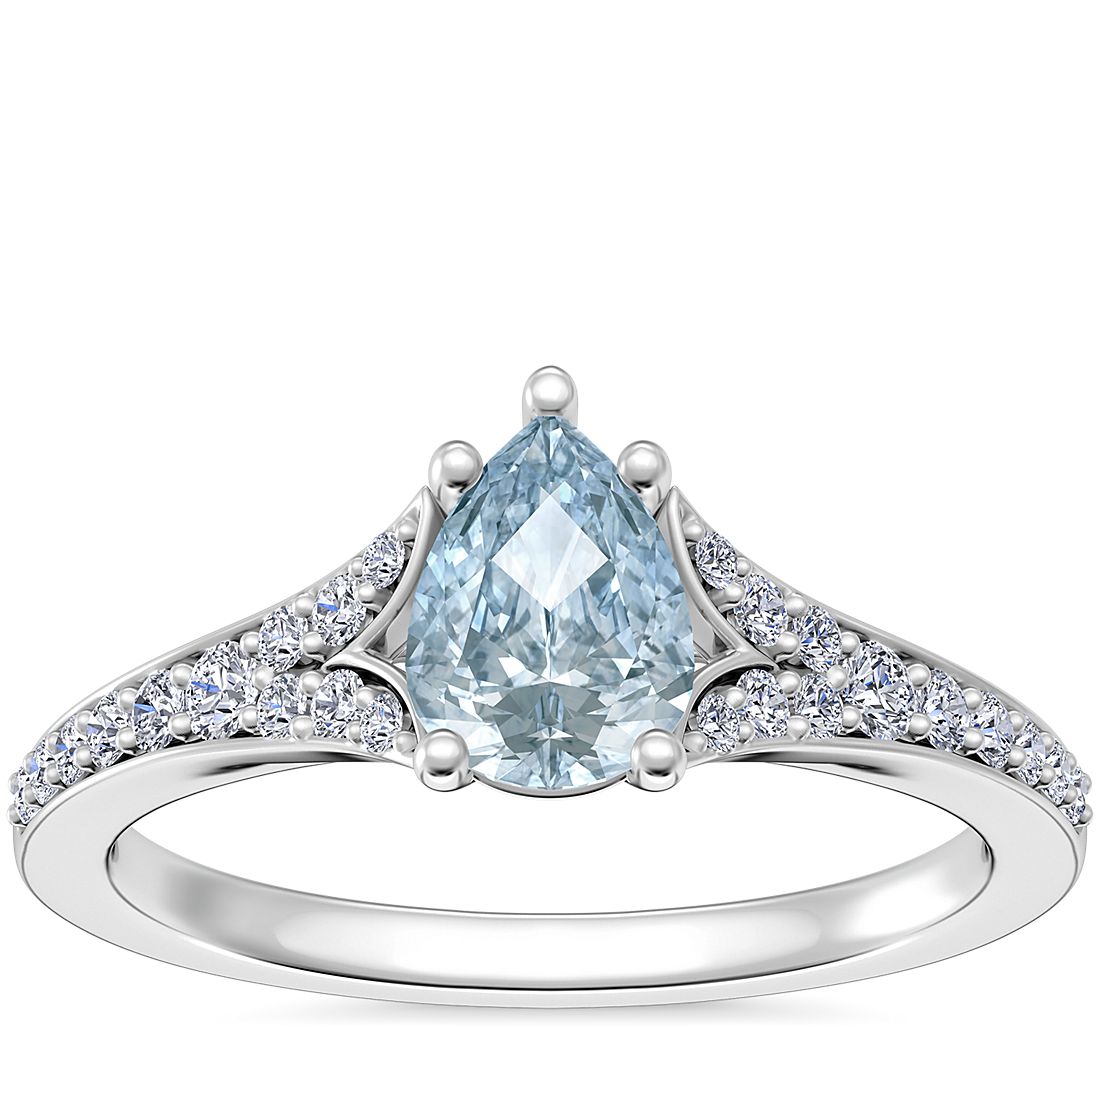 Petite Split Shank Pavé Cathedral Engagement Ring with Pear-Shaped Aquamarine in Platinum (7x5mm)